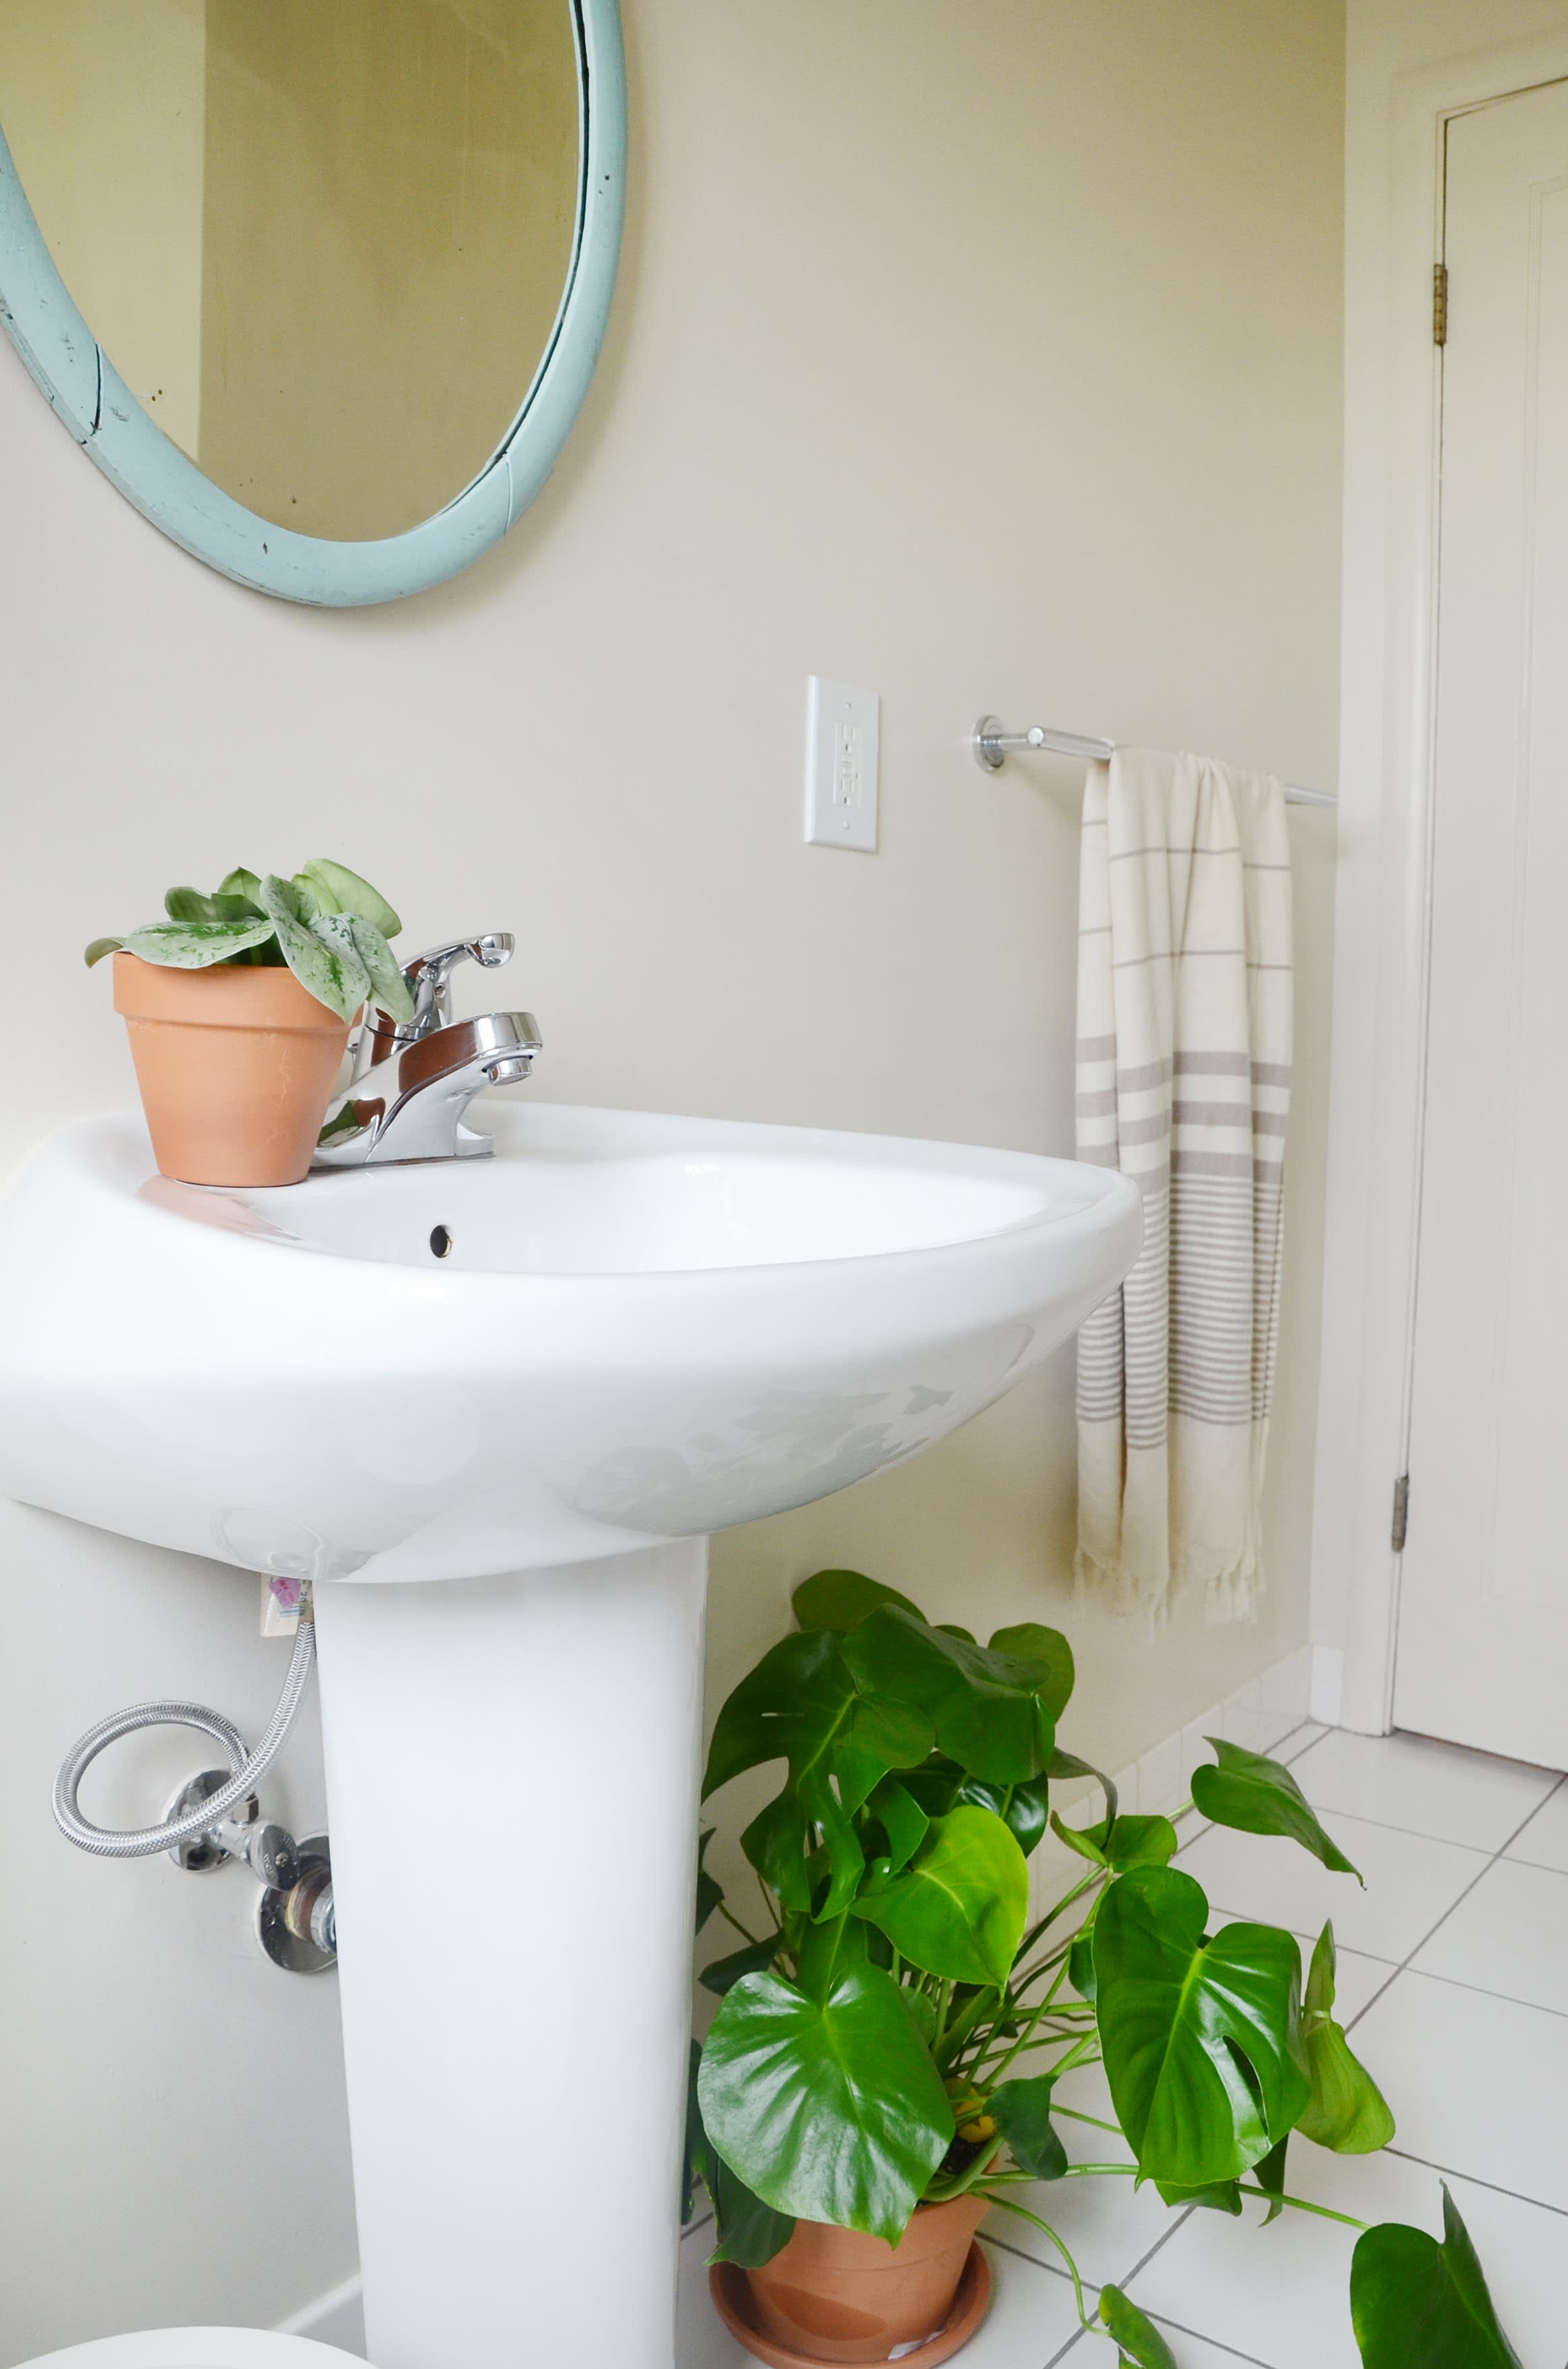 Are Bathroom Pedestal Sinks Outdated?